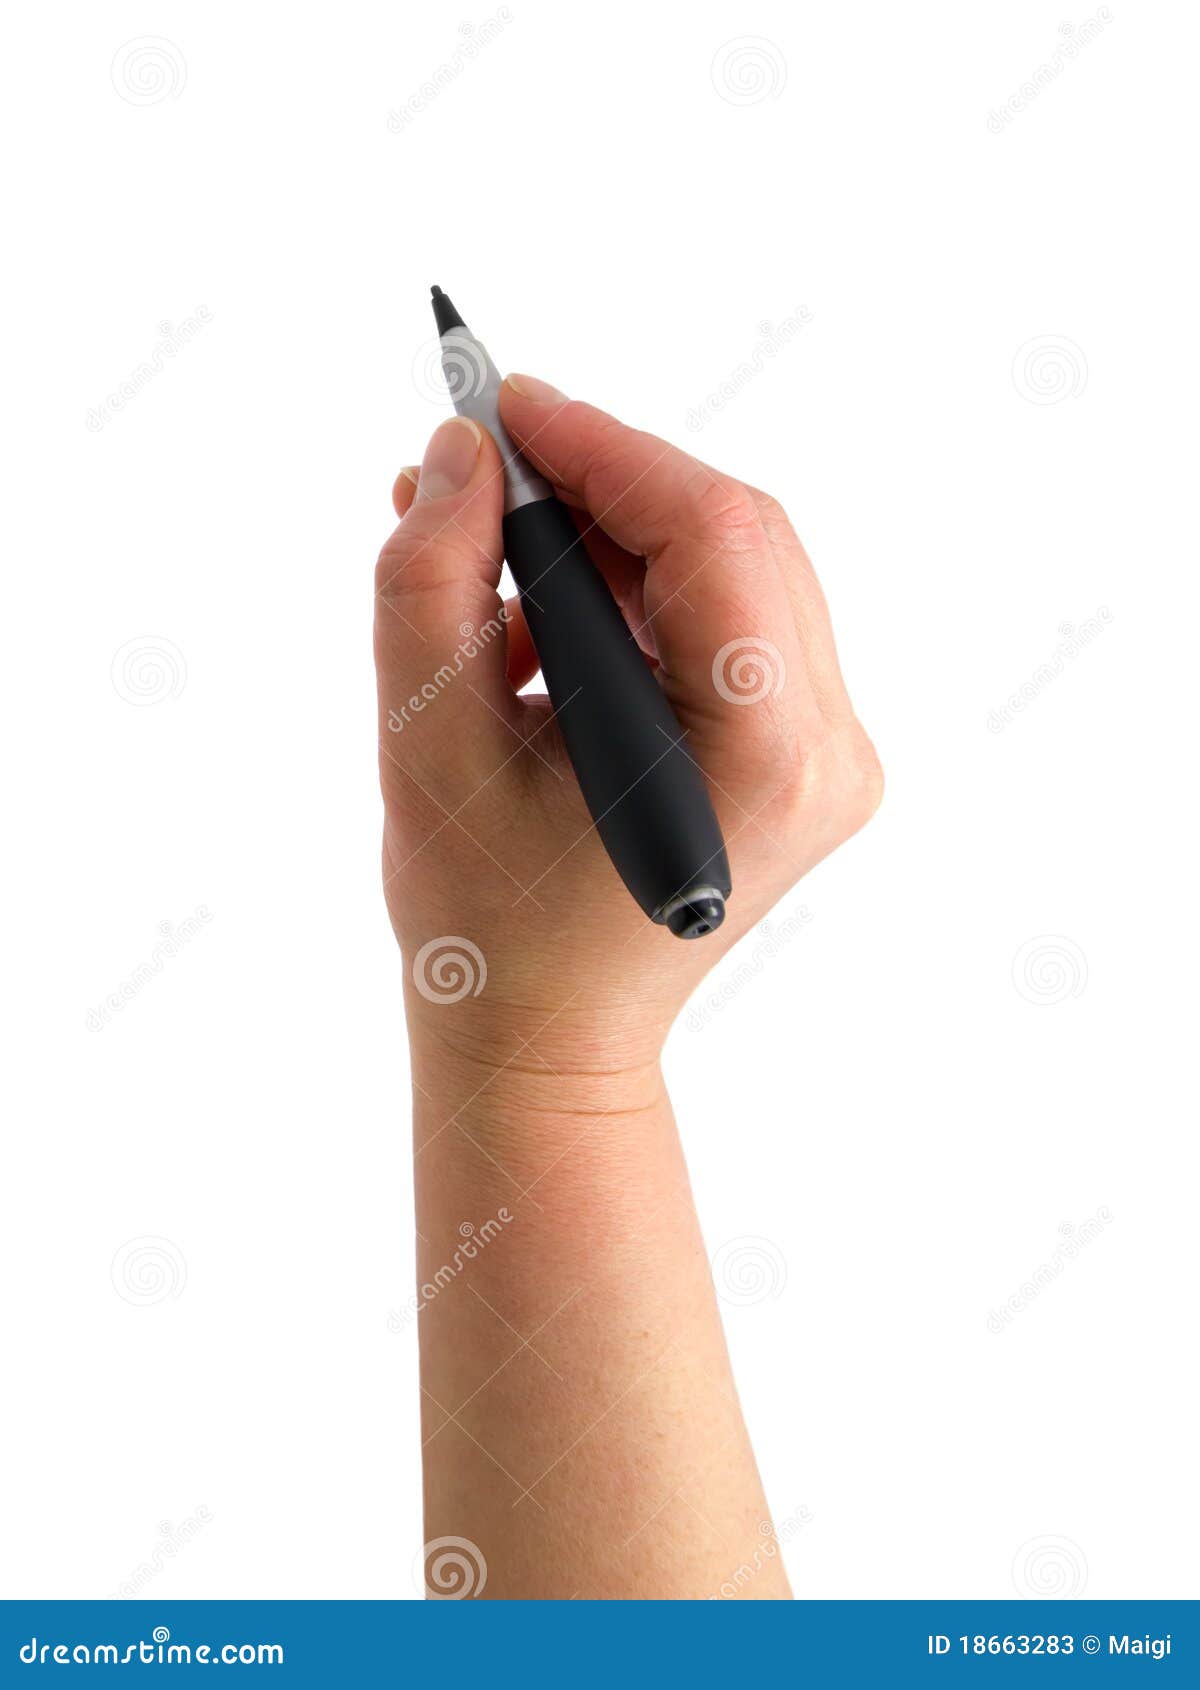 the hand with a pen drawing